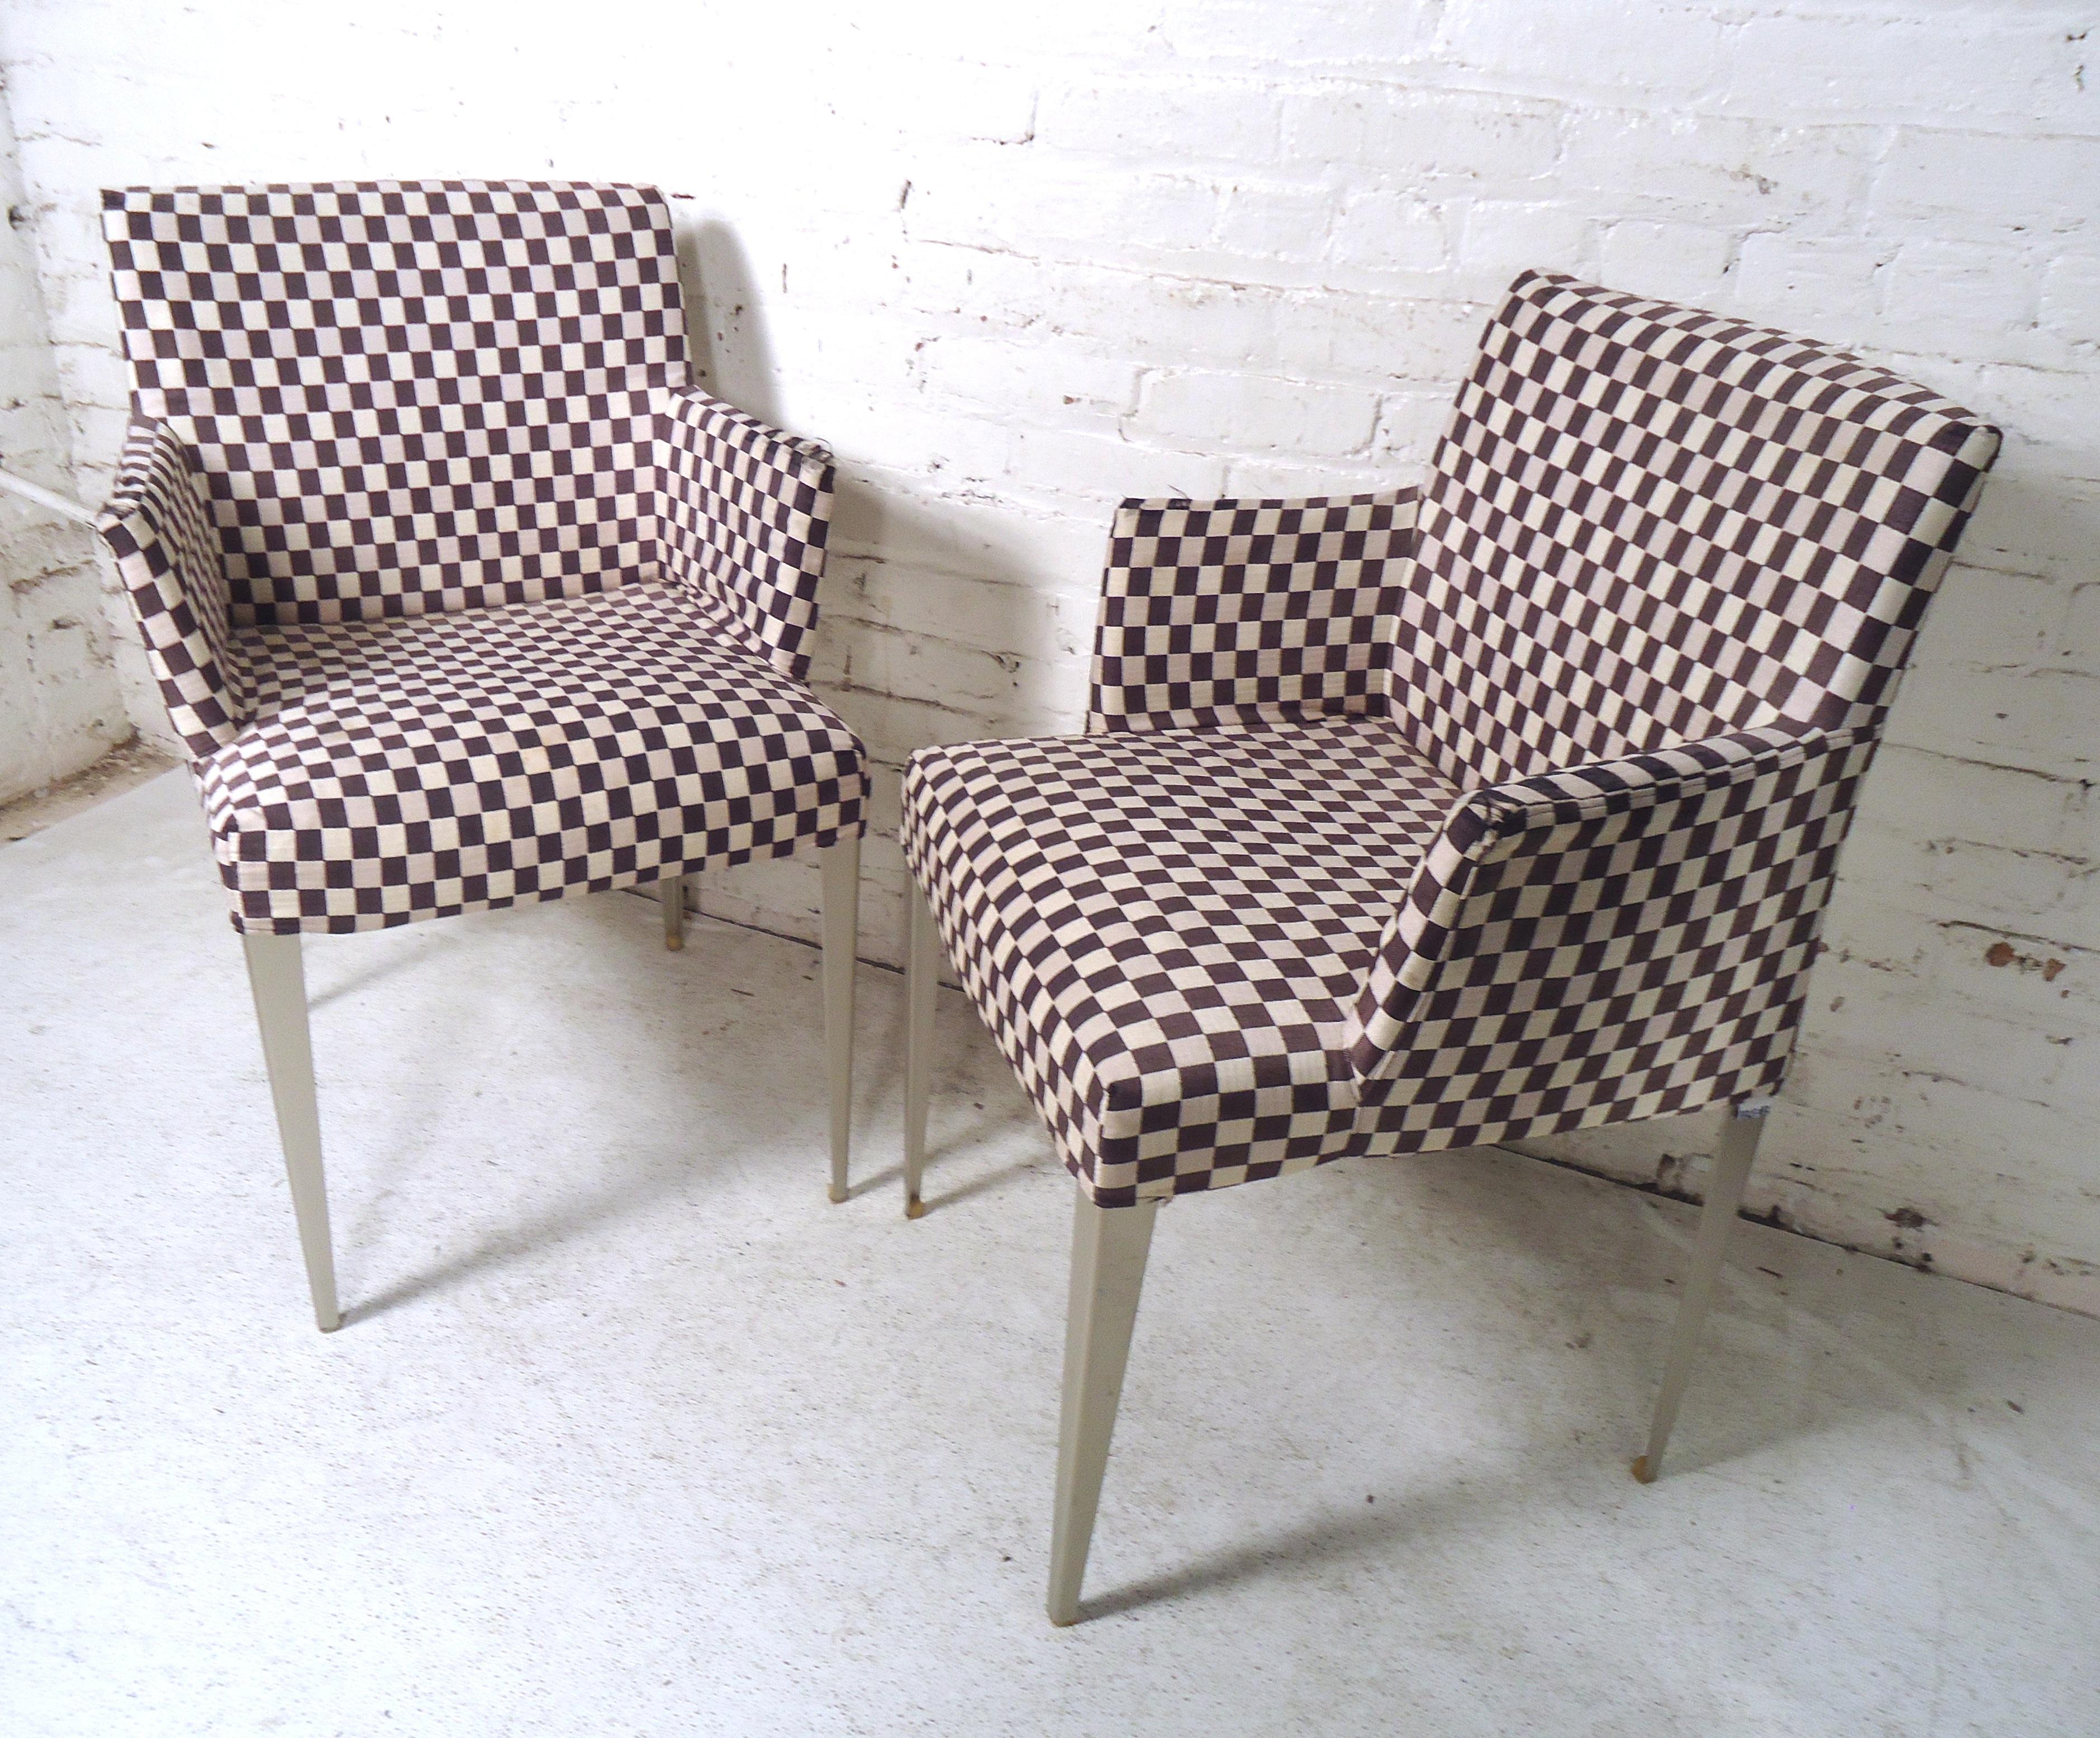 Unusual Italian pair of chairs by B&B Italia featured in checkered fabric.
(Please confirm item location- NY or NJ- with dealer).